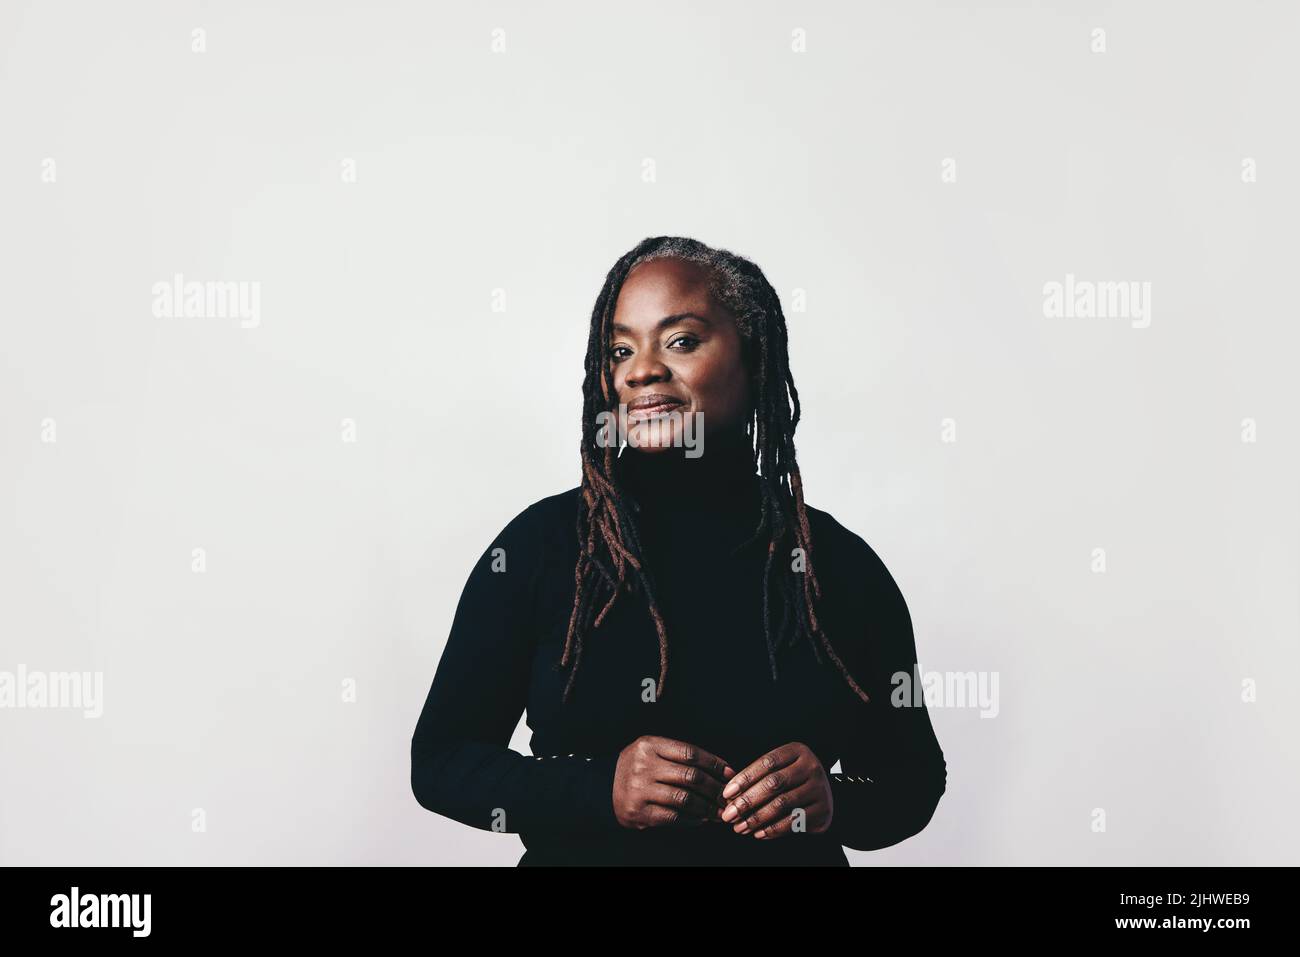 Confident middle-aged woman with dreadlocks looking at the camera in a studio. Elegant black woman standing against a grey background. Stock Photo